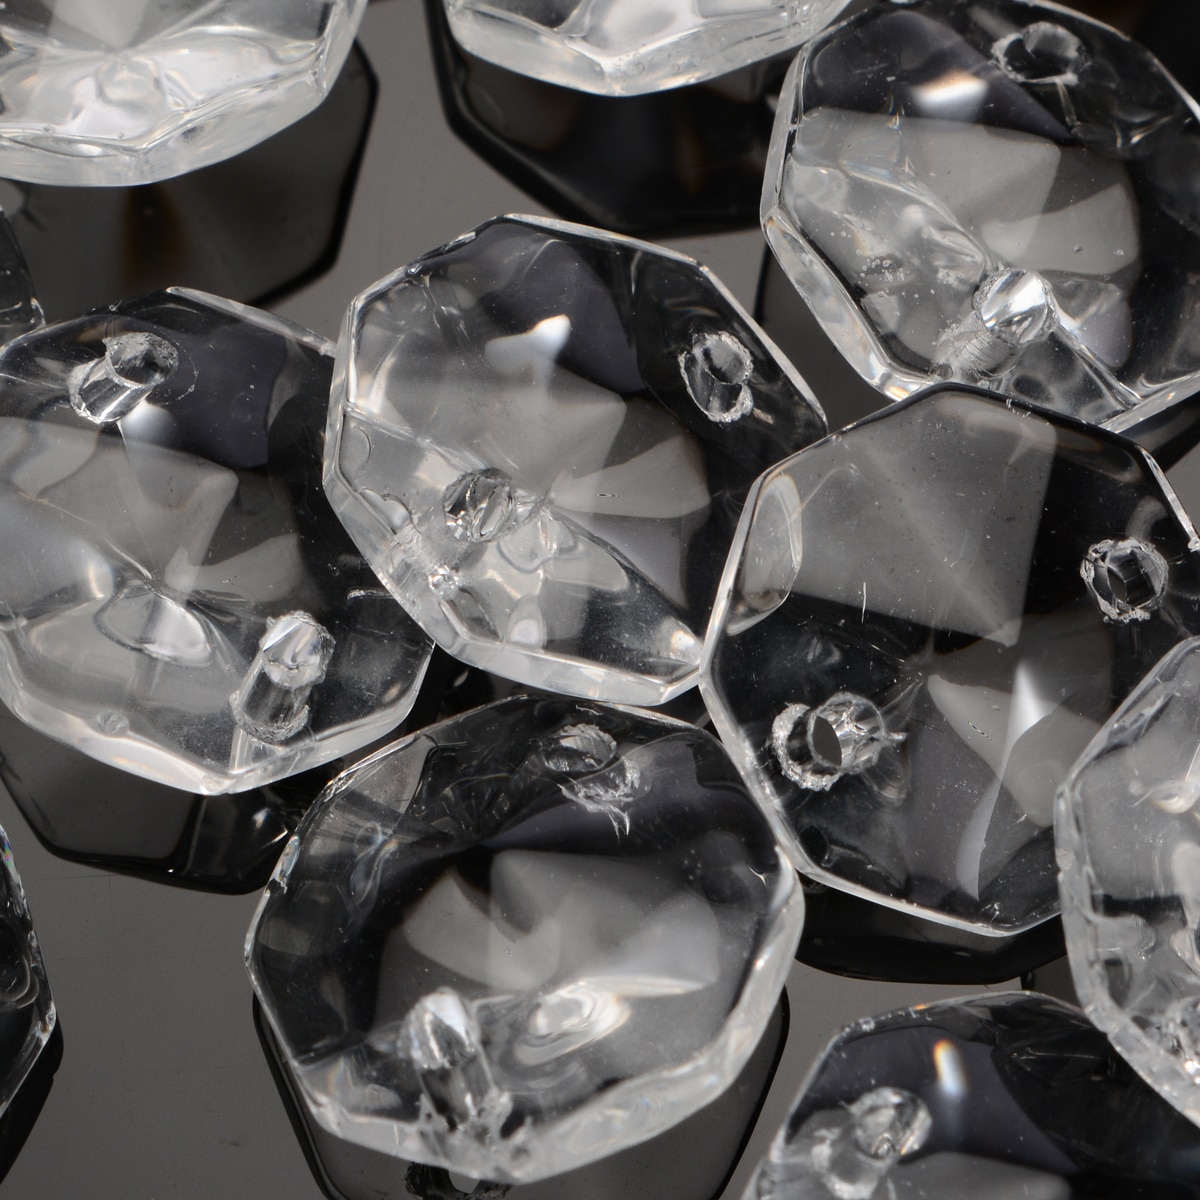 50Pcs 14mm Glass Crystal Prisms Clear Octagonal Beads Glass Pendant Chandeliers for Lamp Light Decorations